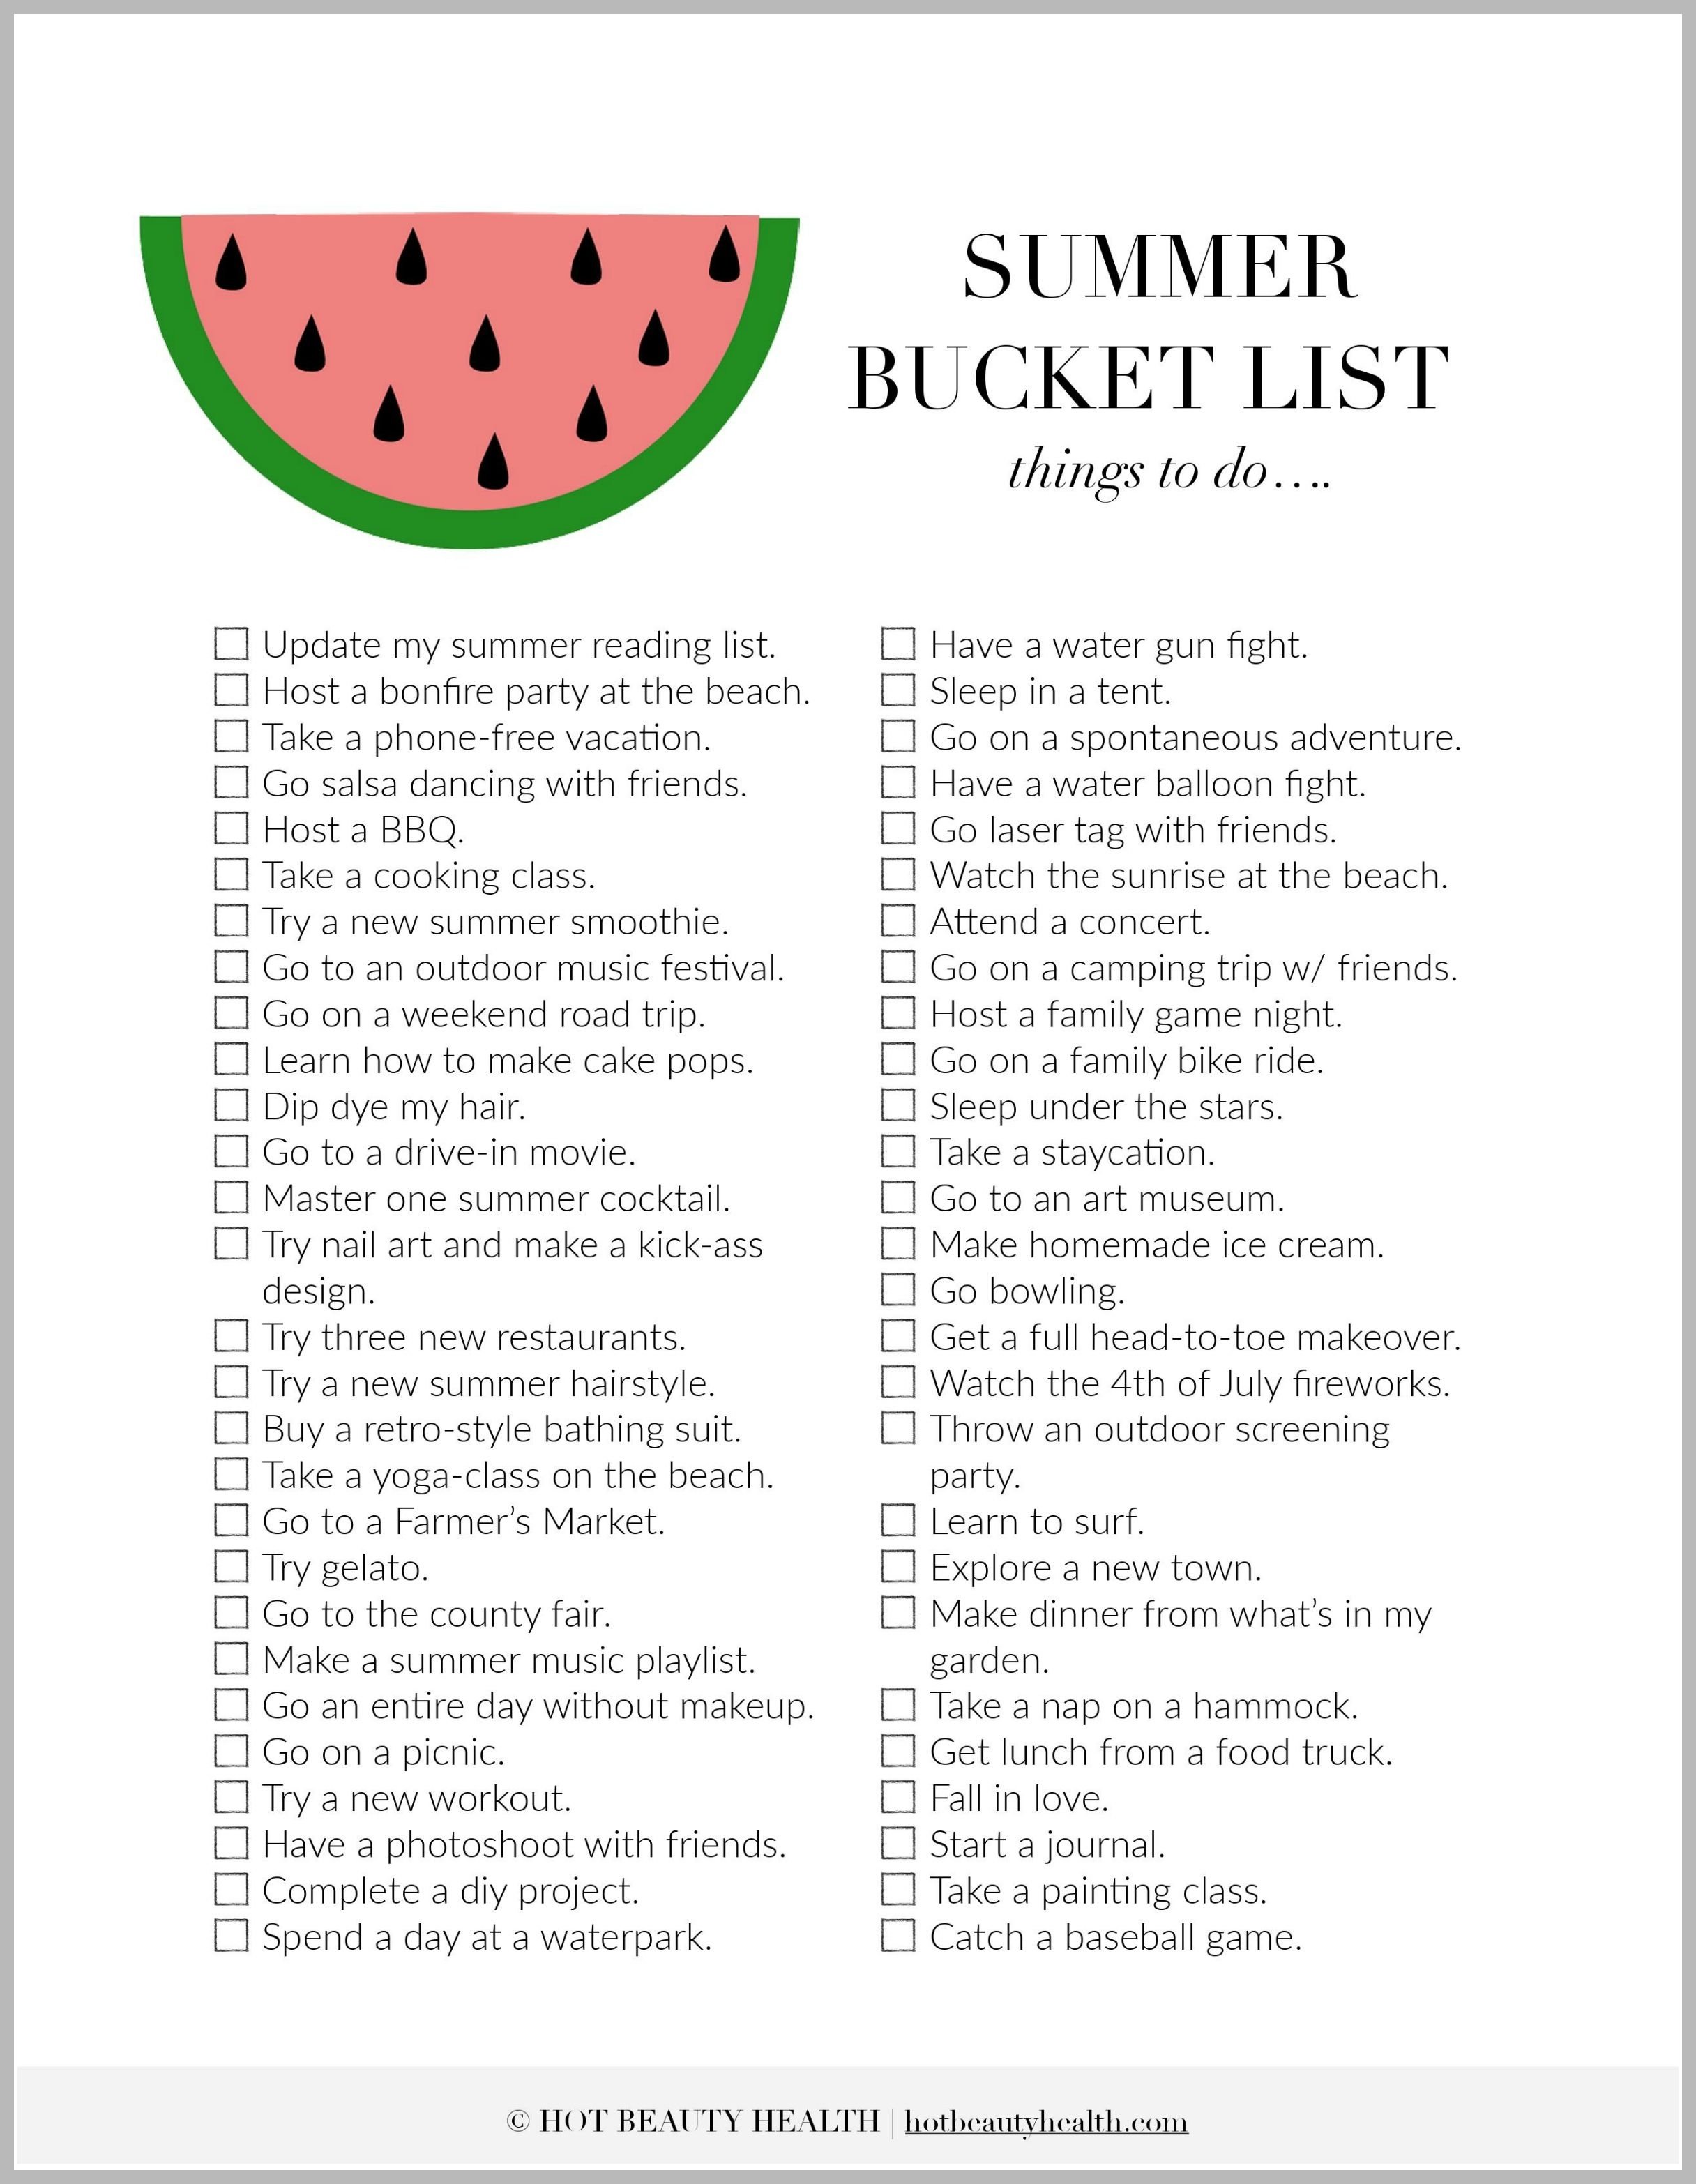 10 Fashionable Fun Ideas To Do With Friends summer bucket list ideas 30 things to do summer bucket lists 6 2022